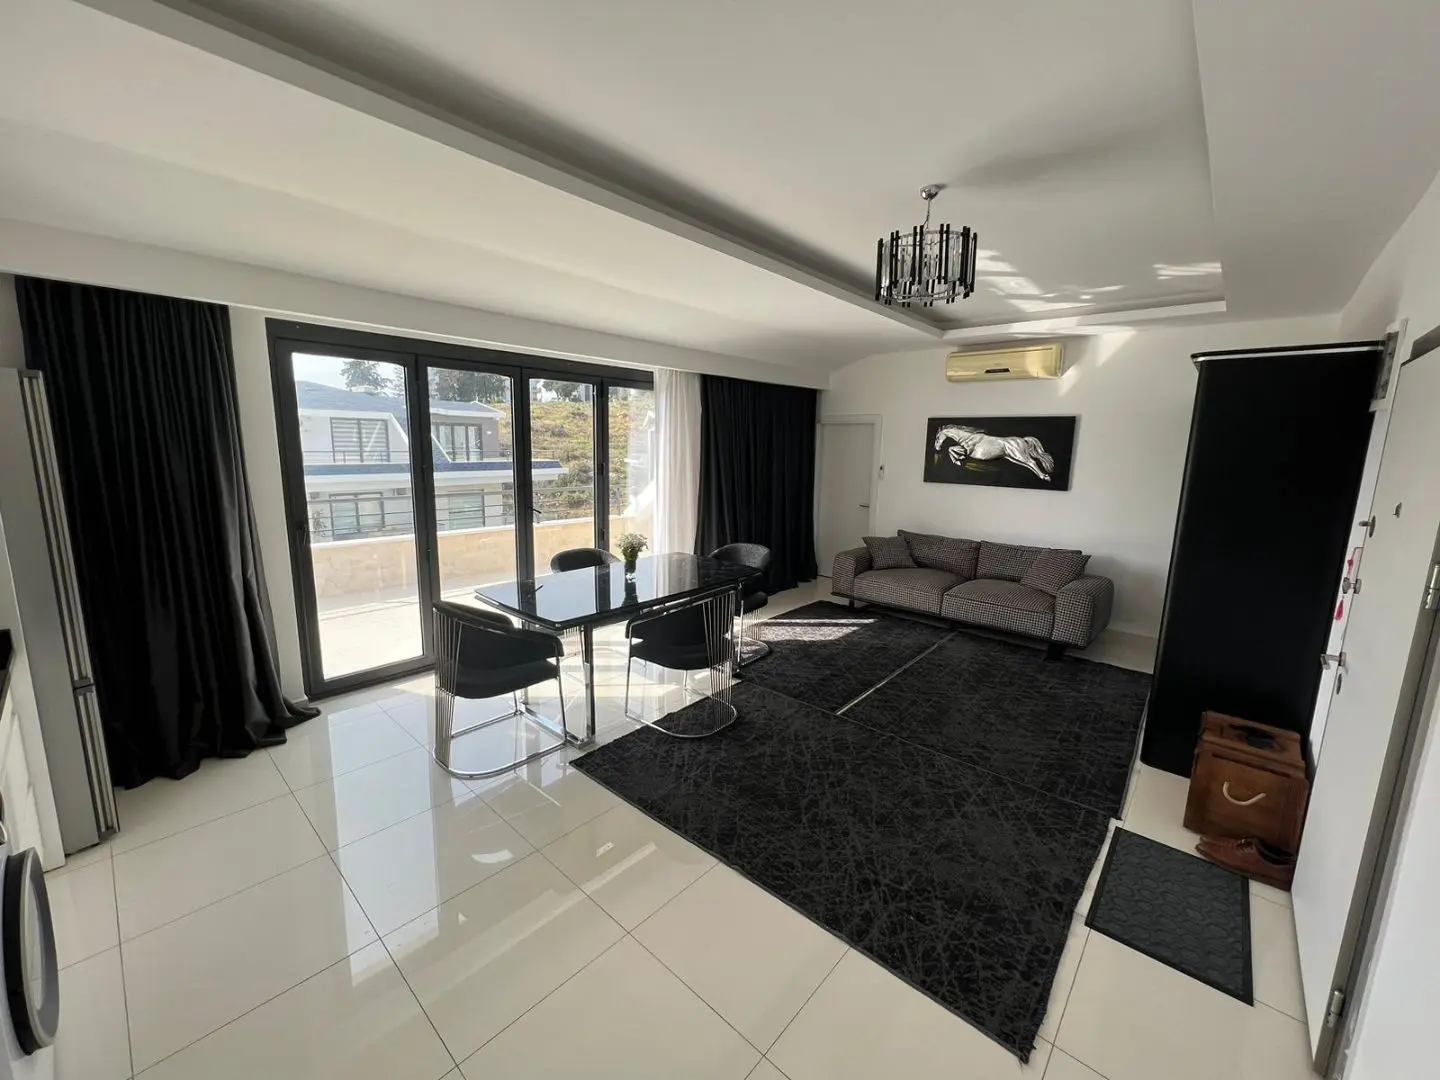 3+1 DUPLEX FLAT IN A FULL ACTIVITY SITE FOR SALE IN ALANYA KESTEL